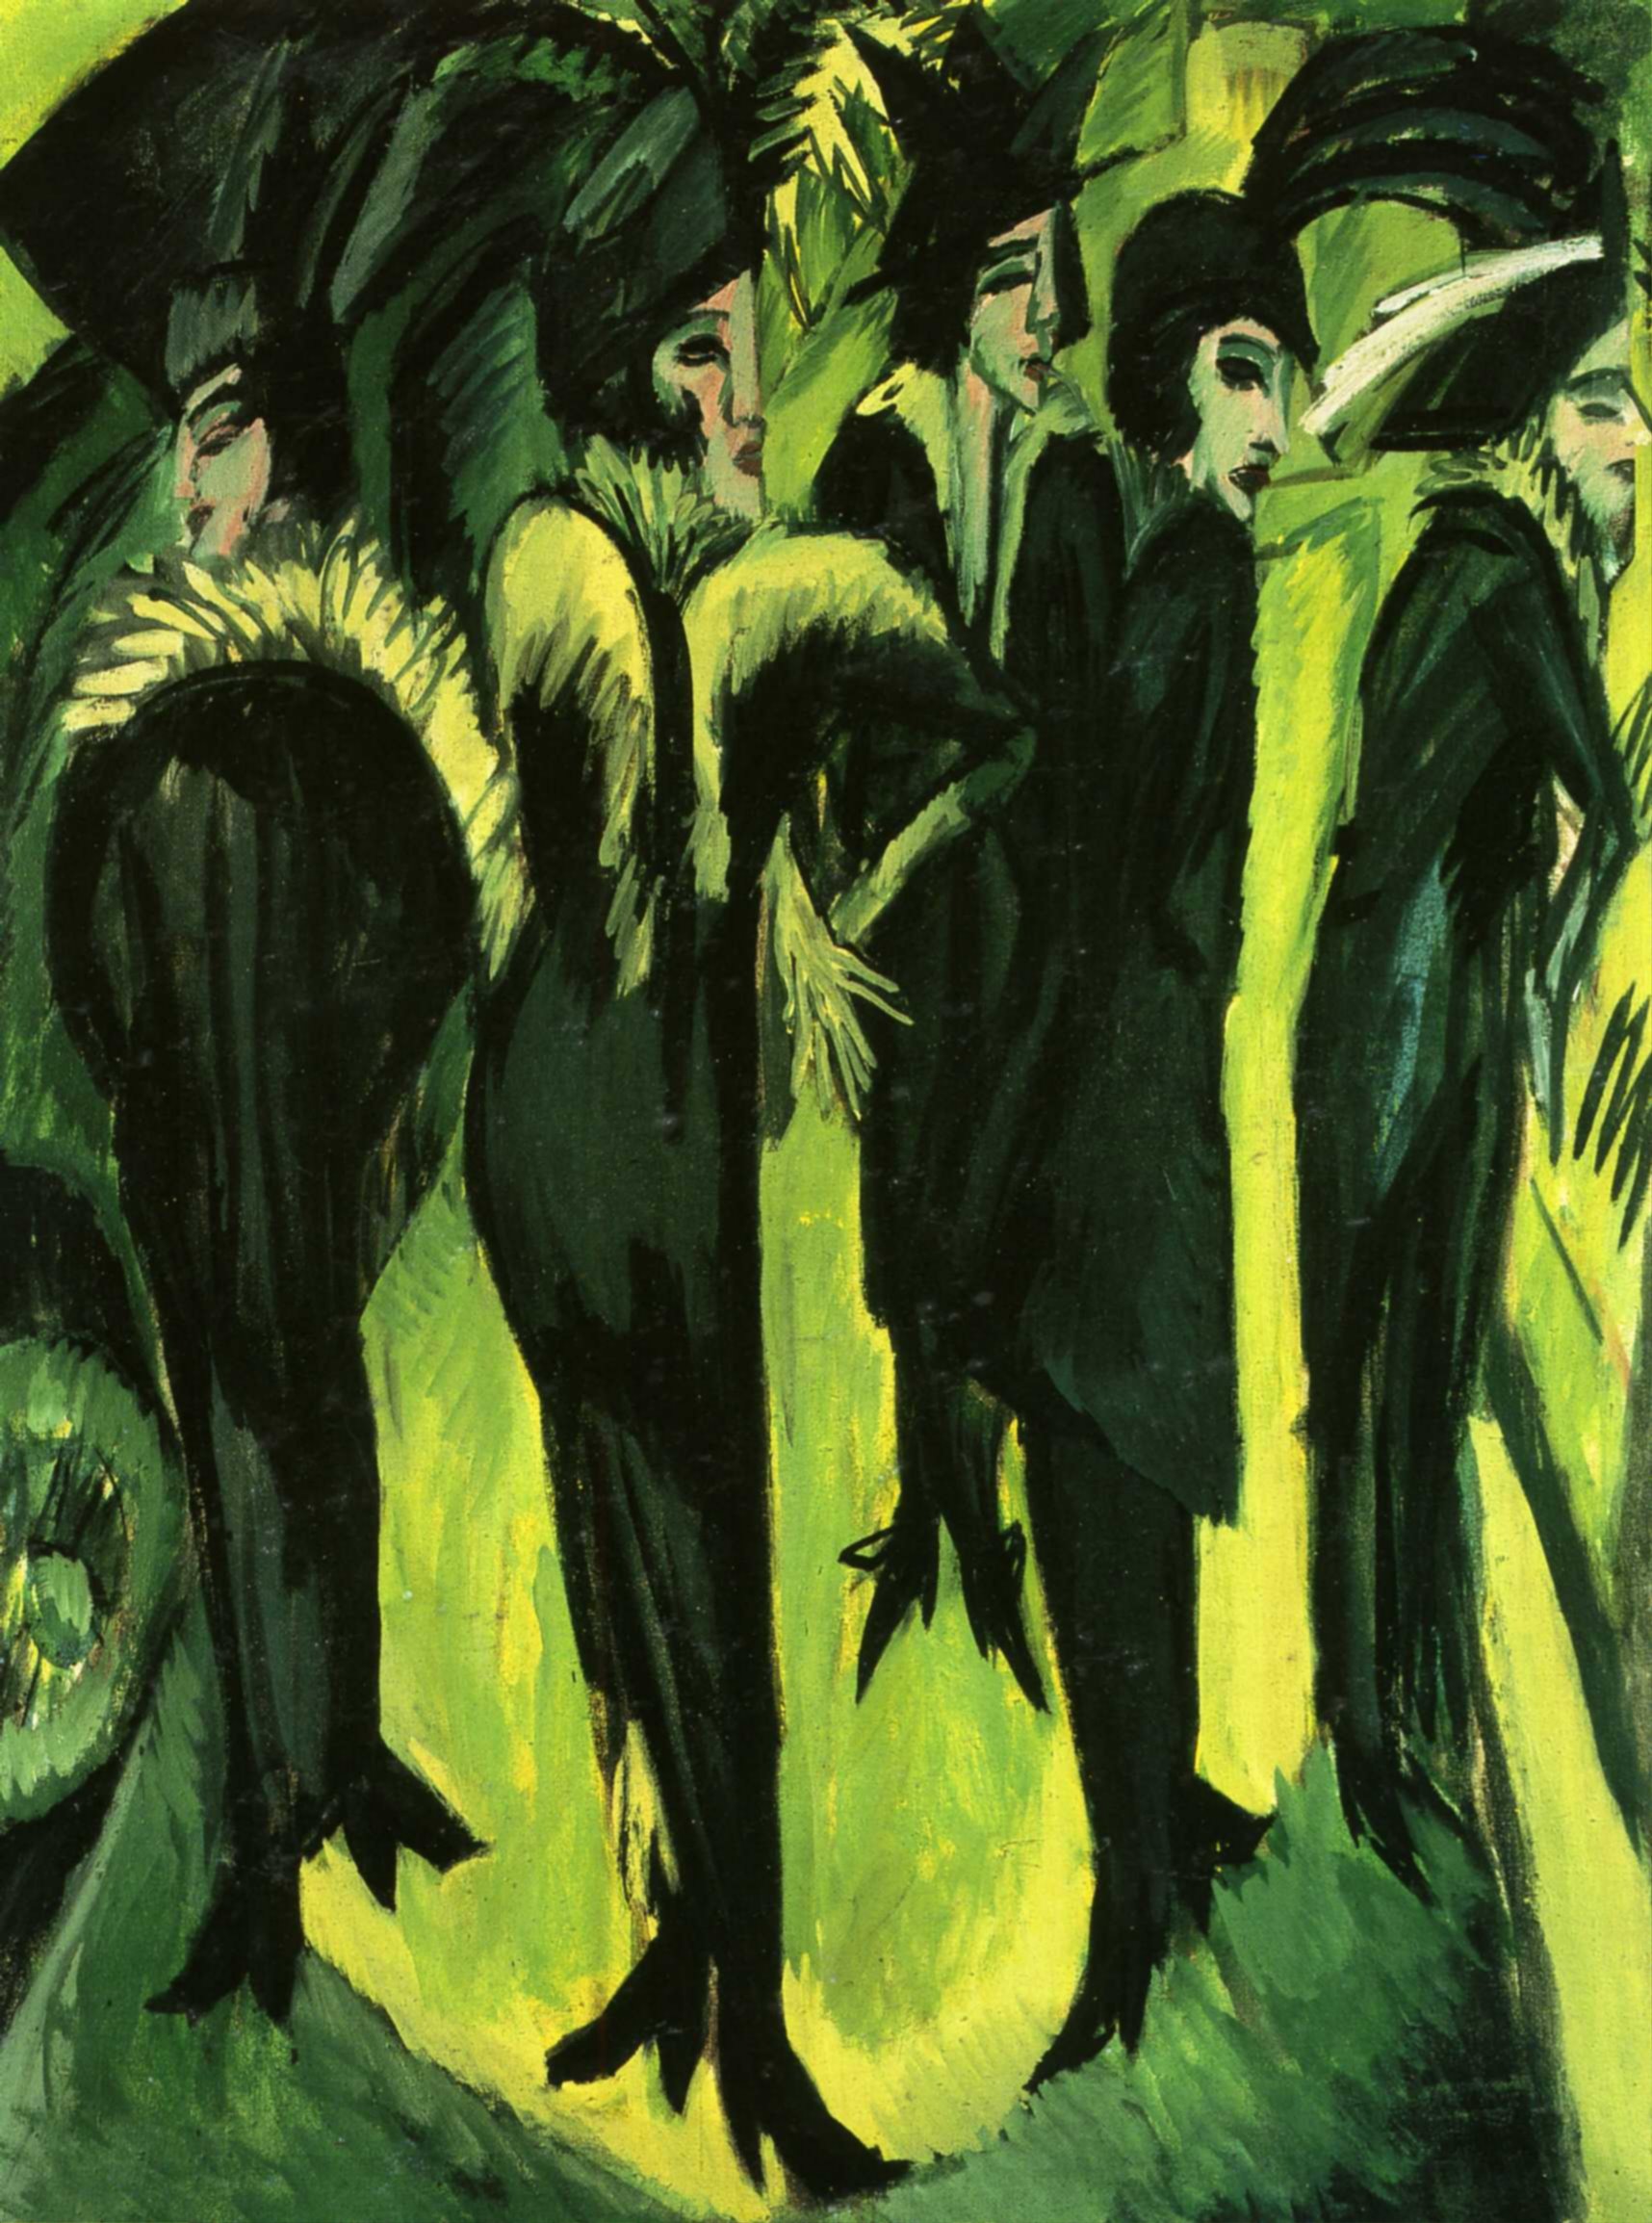 1913 Ernst Ludwig Kirchner - Five women in the street